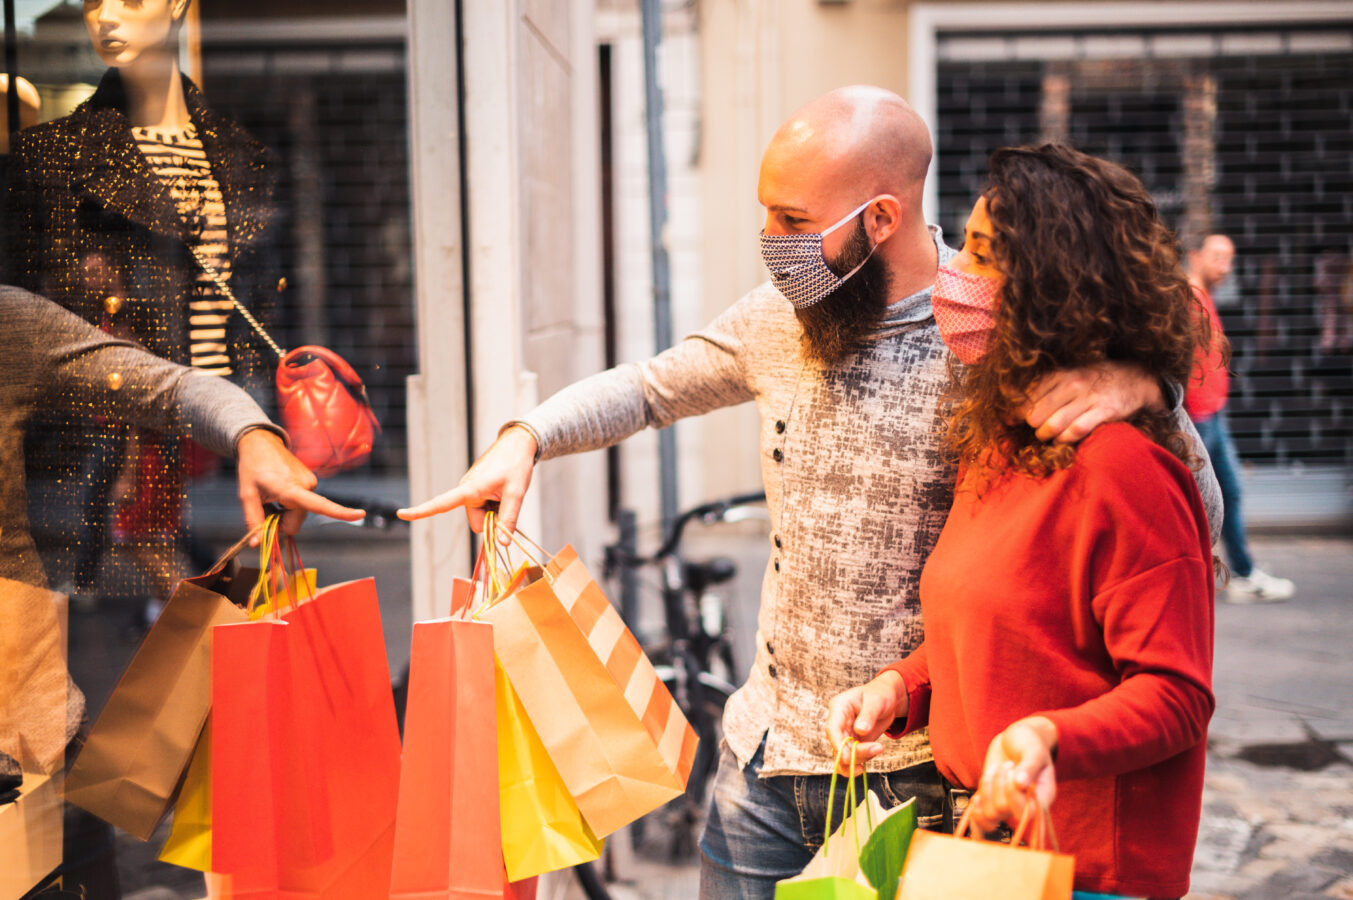 An image showing a couple shopping during the holiday. This picture represents according to the Christmas marketing strategies.